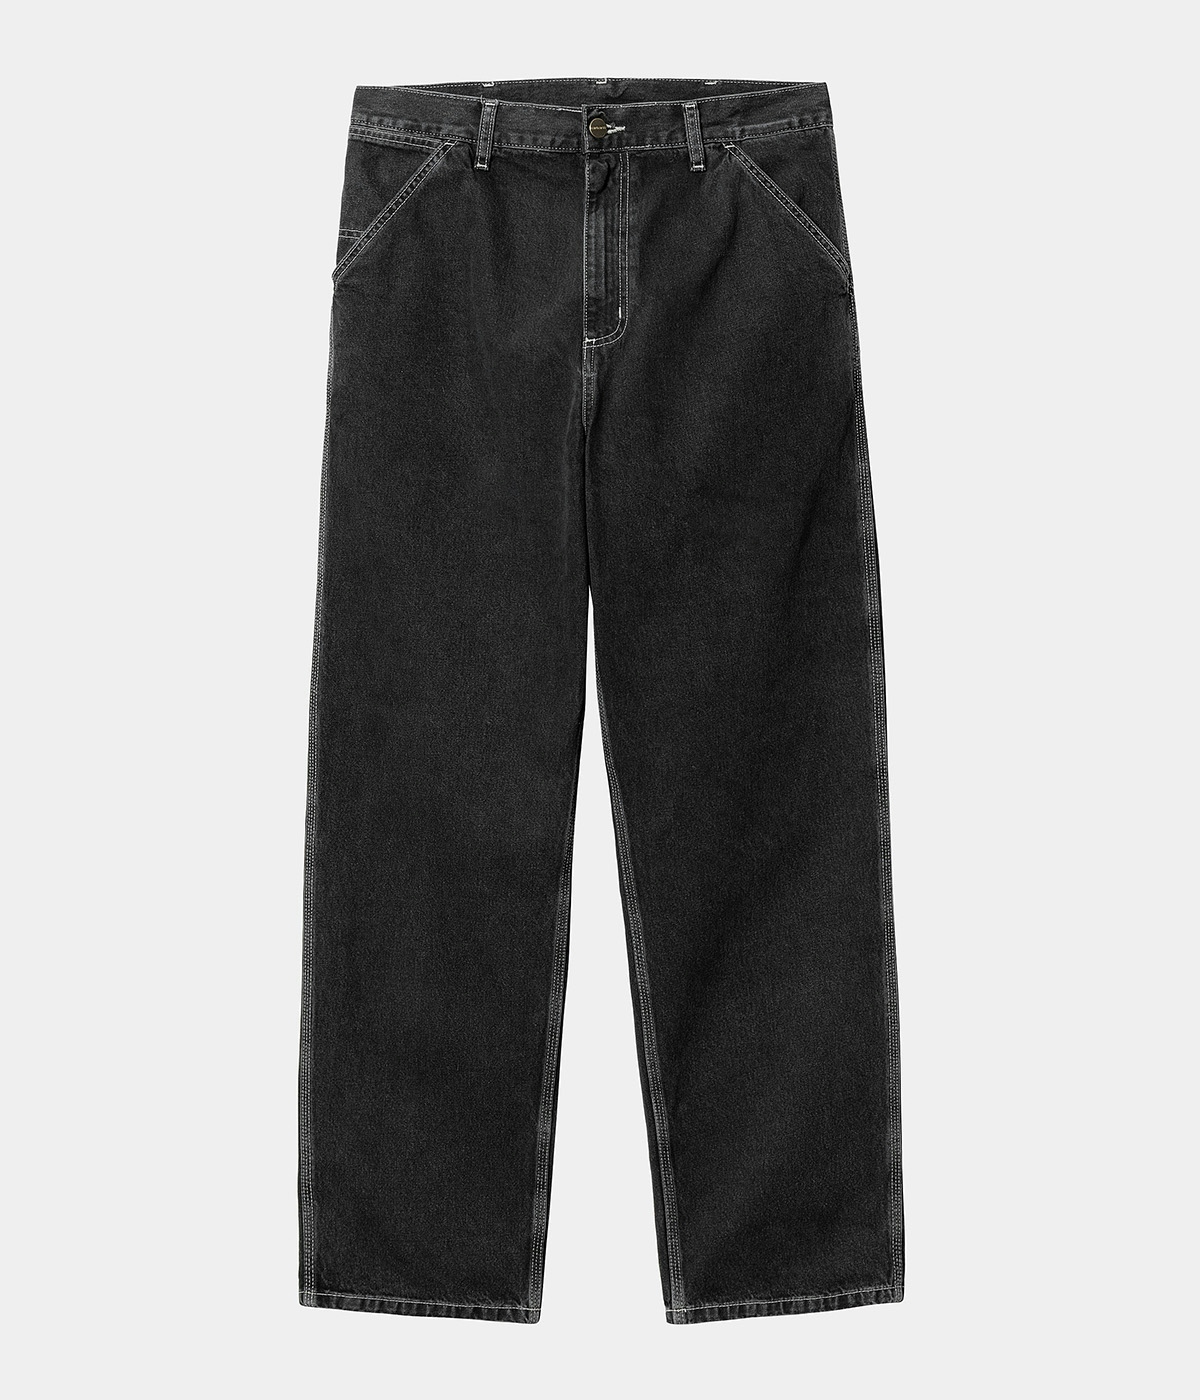 Carhartt Pant Simple Black/Stone washed 3